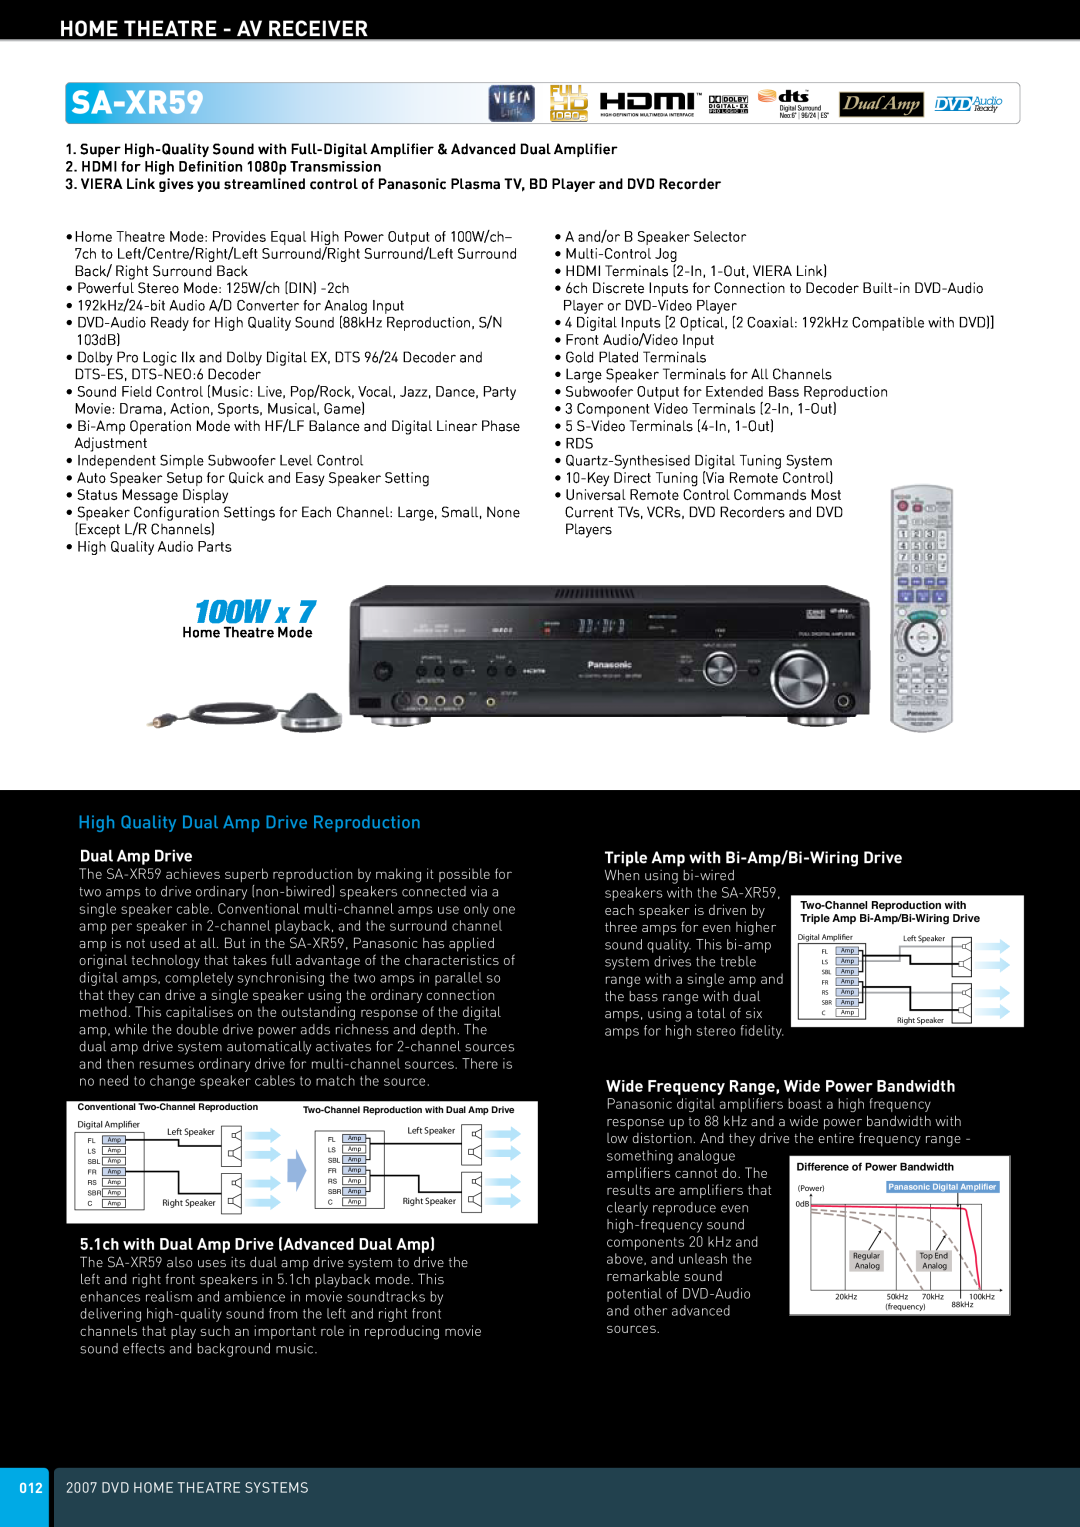 Panasonic DVD Home Theatre System SA-XR59, Home Theatre - Av Receiver, 100W X, High Quality Dual Amp Drive Reproduction 